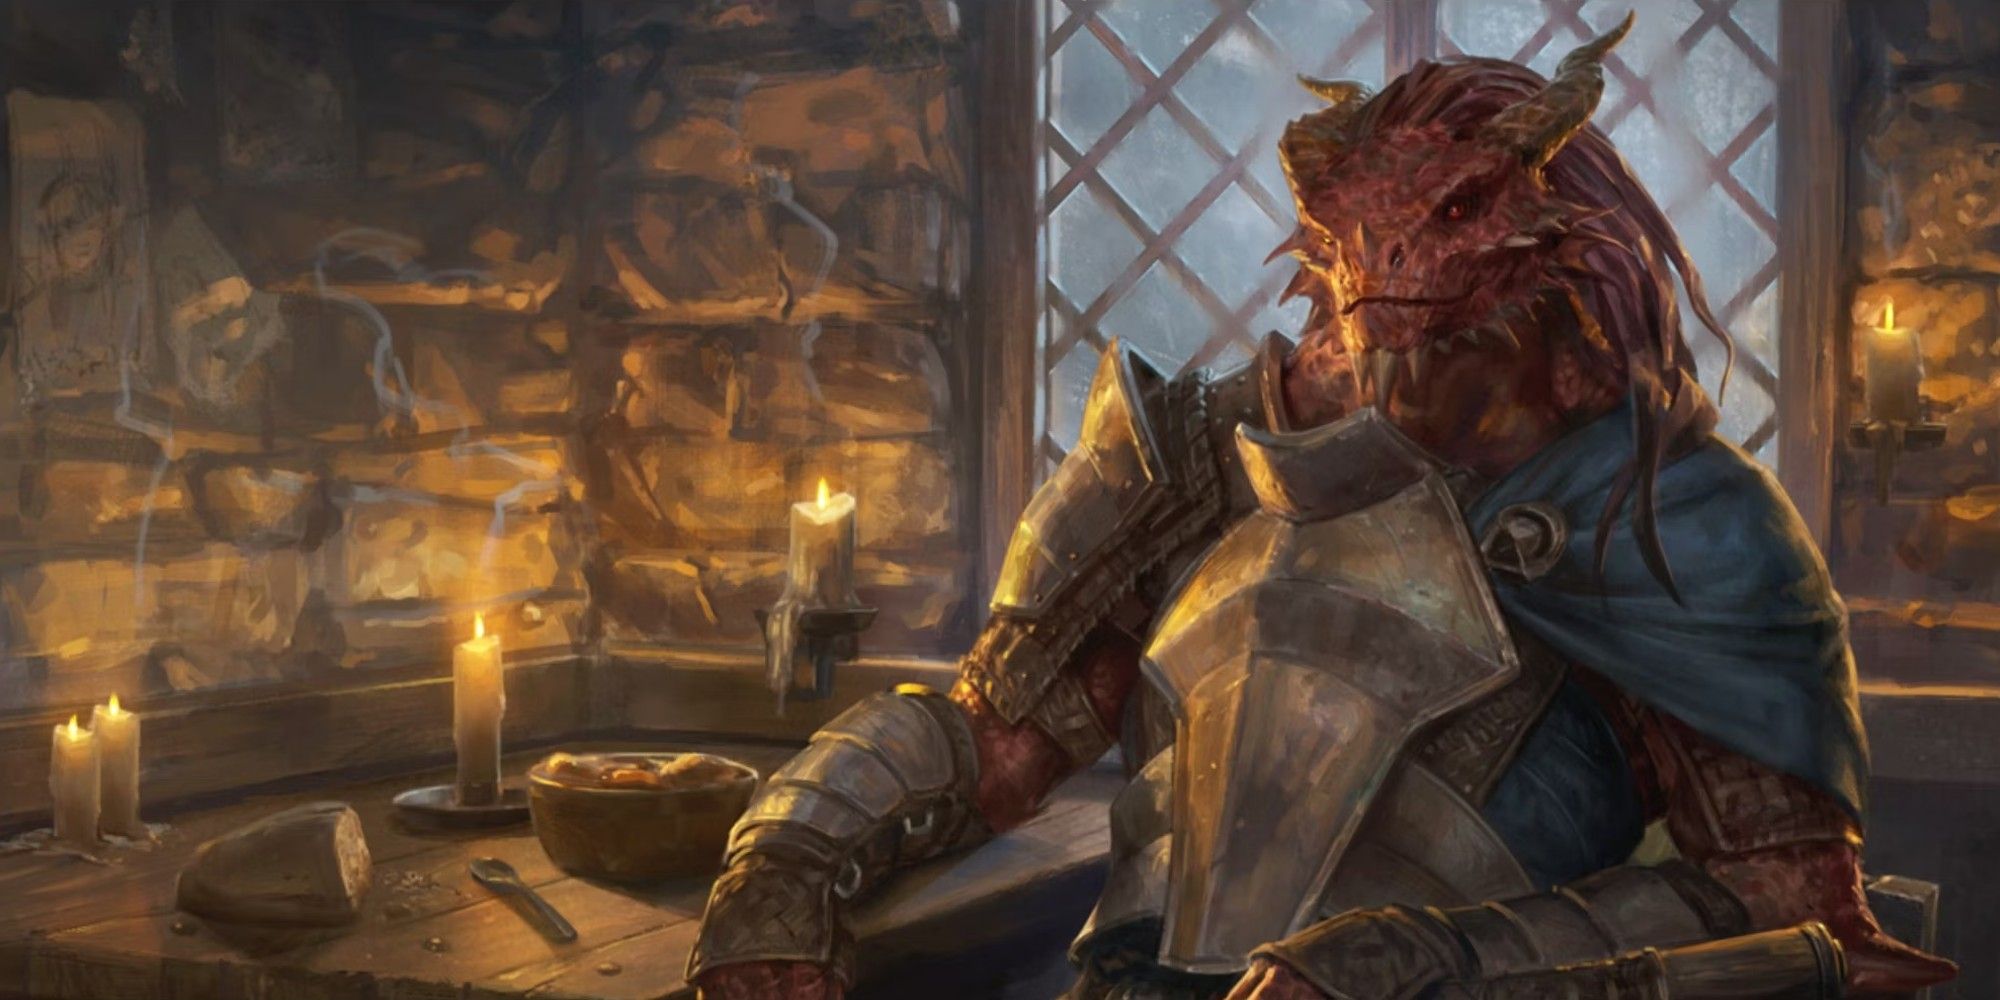 Jaded Sell-Sword by Randy Vargas, a red dragonborn hanging out in a tavern